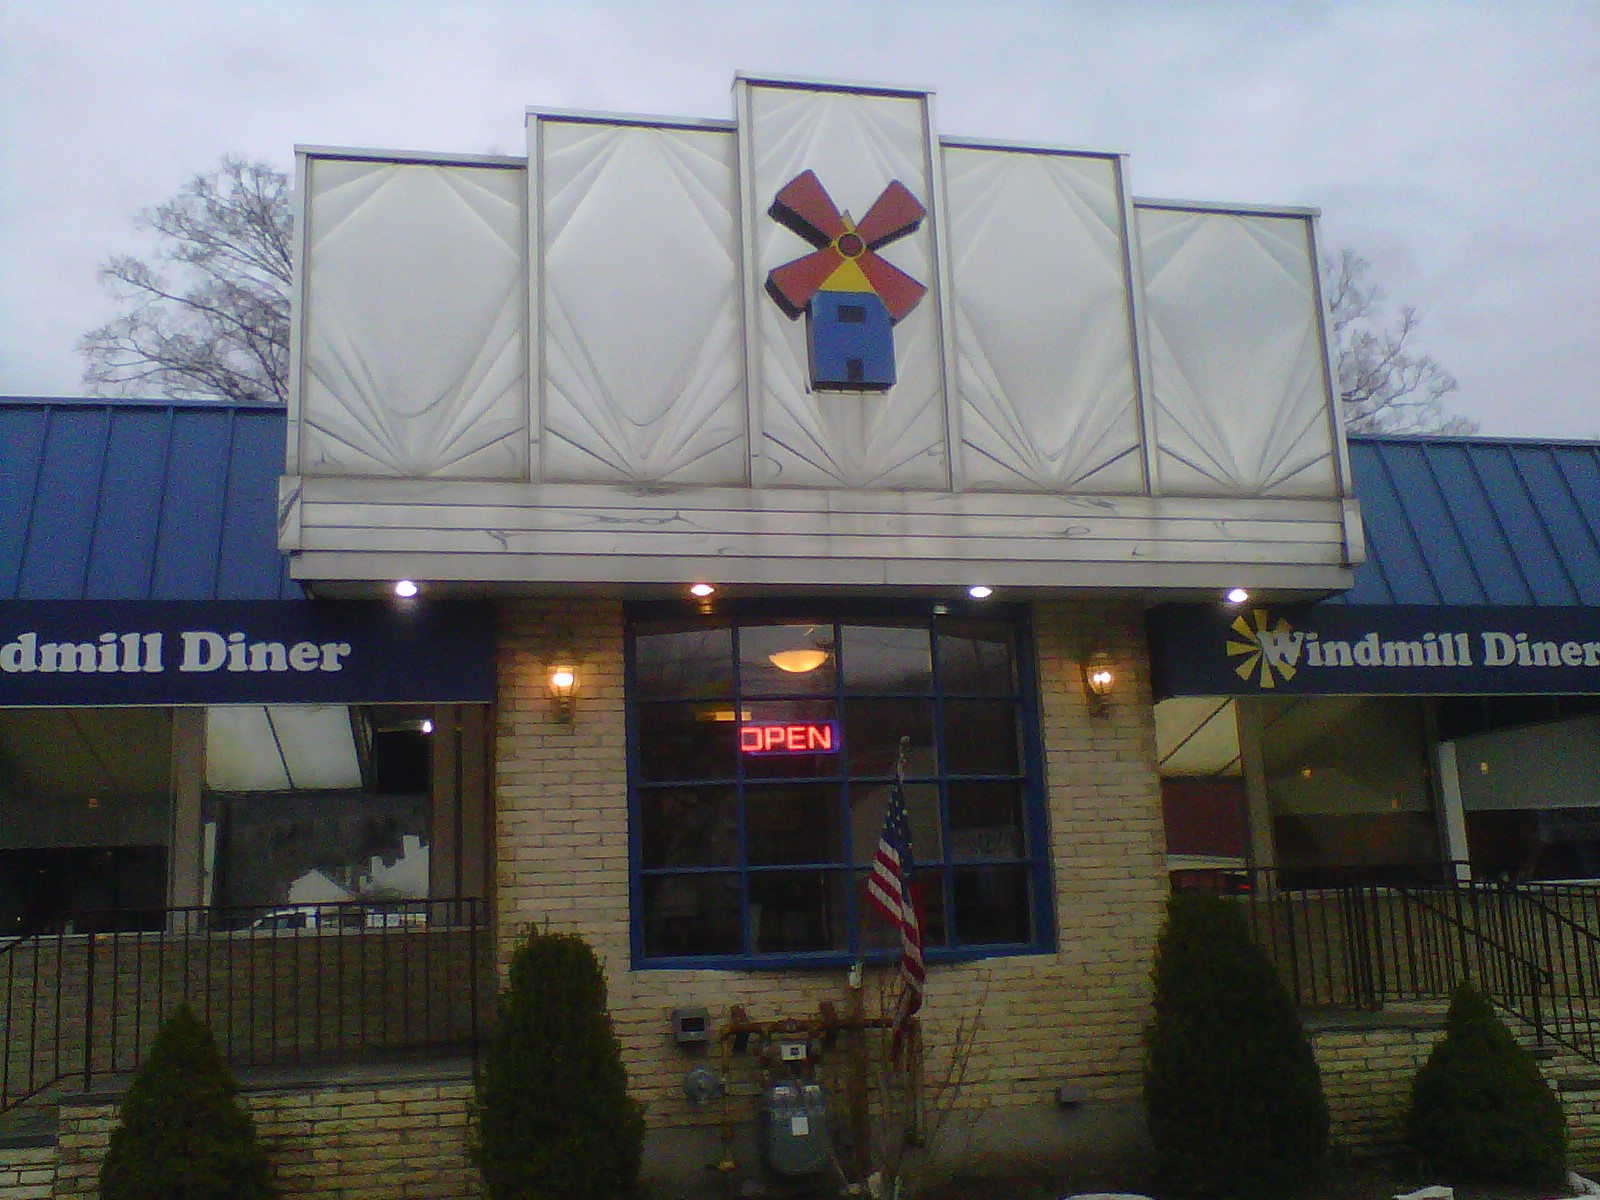 Windmill Diner - front